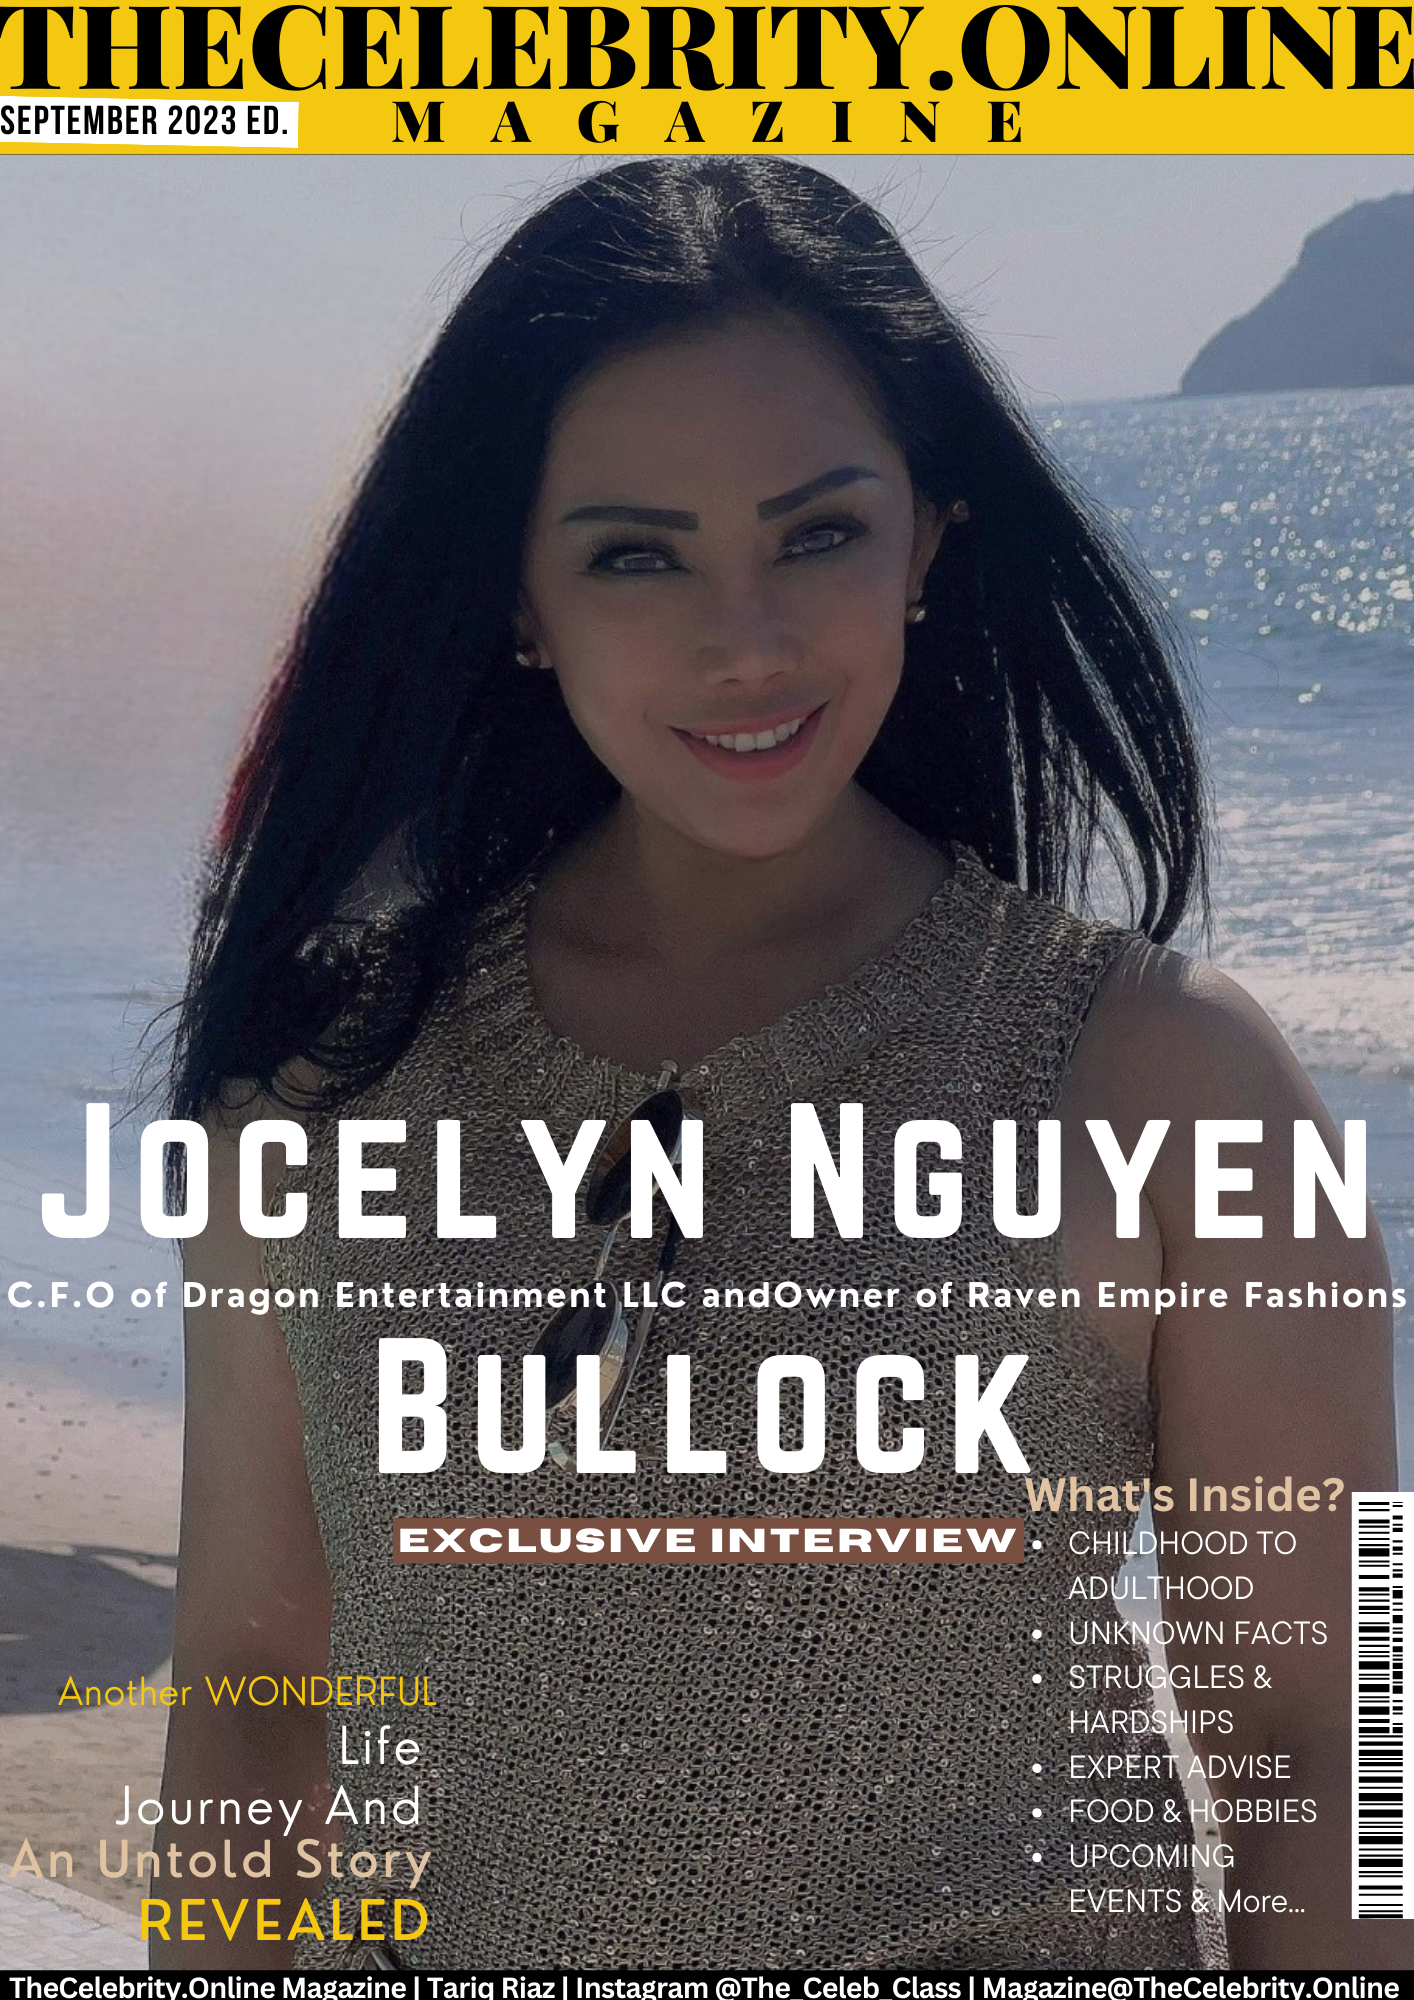 A Vietnamese Fashion Designer to Watch For in 2023, Jocelyn Nguyen Bullock of Raven Empire Fashions